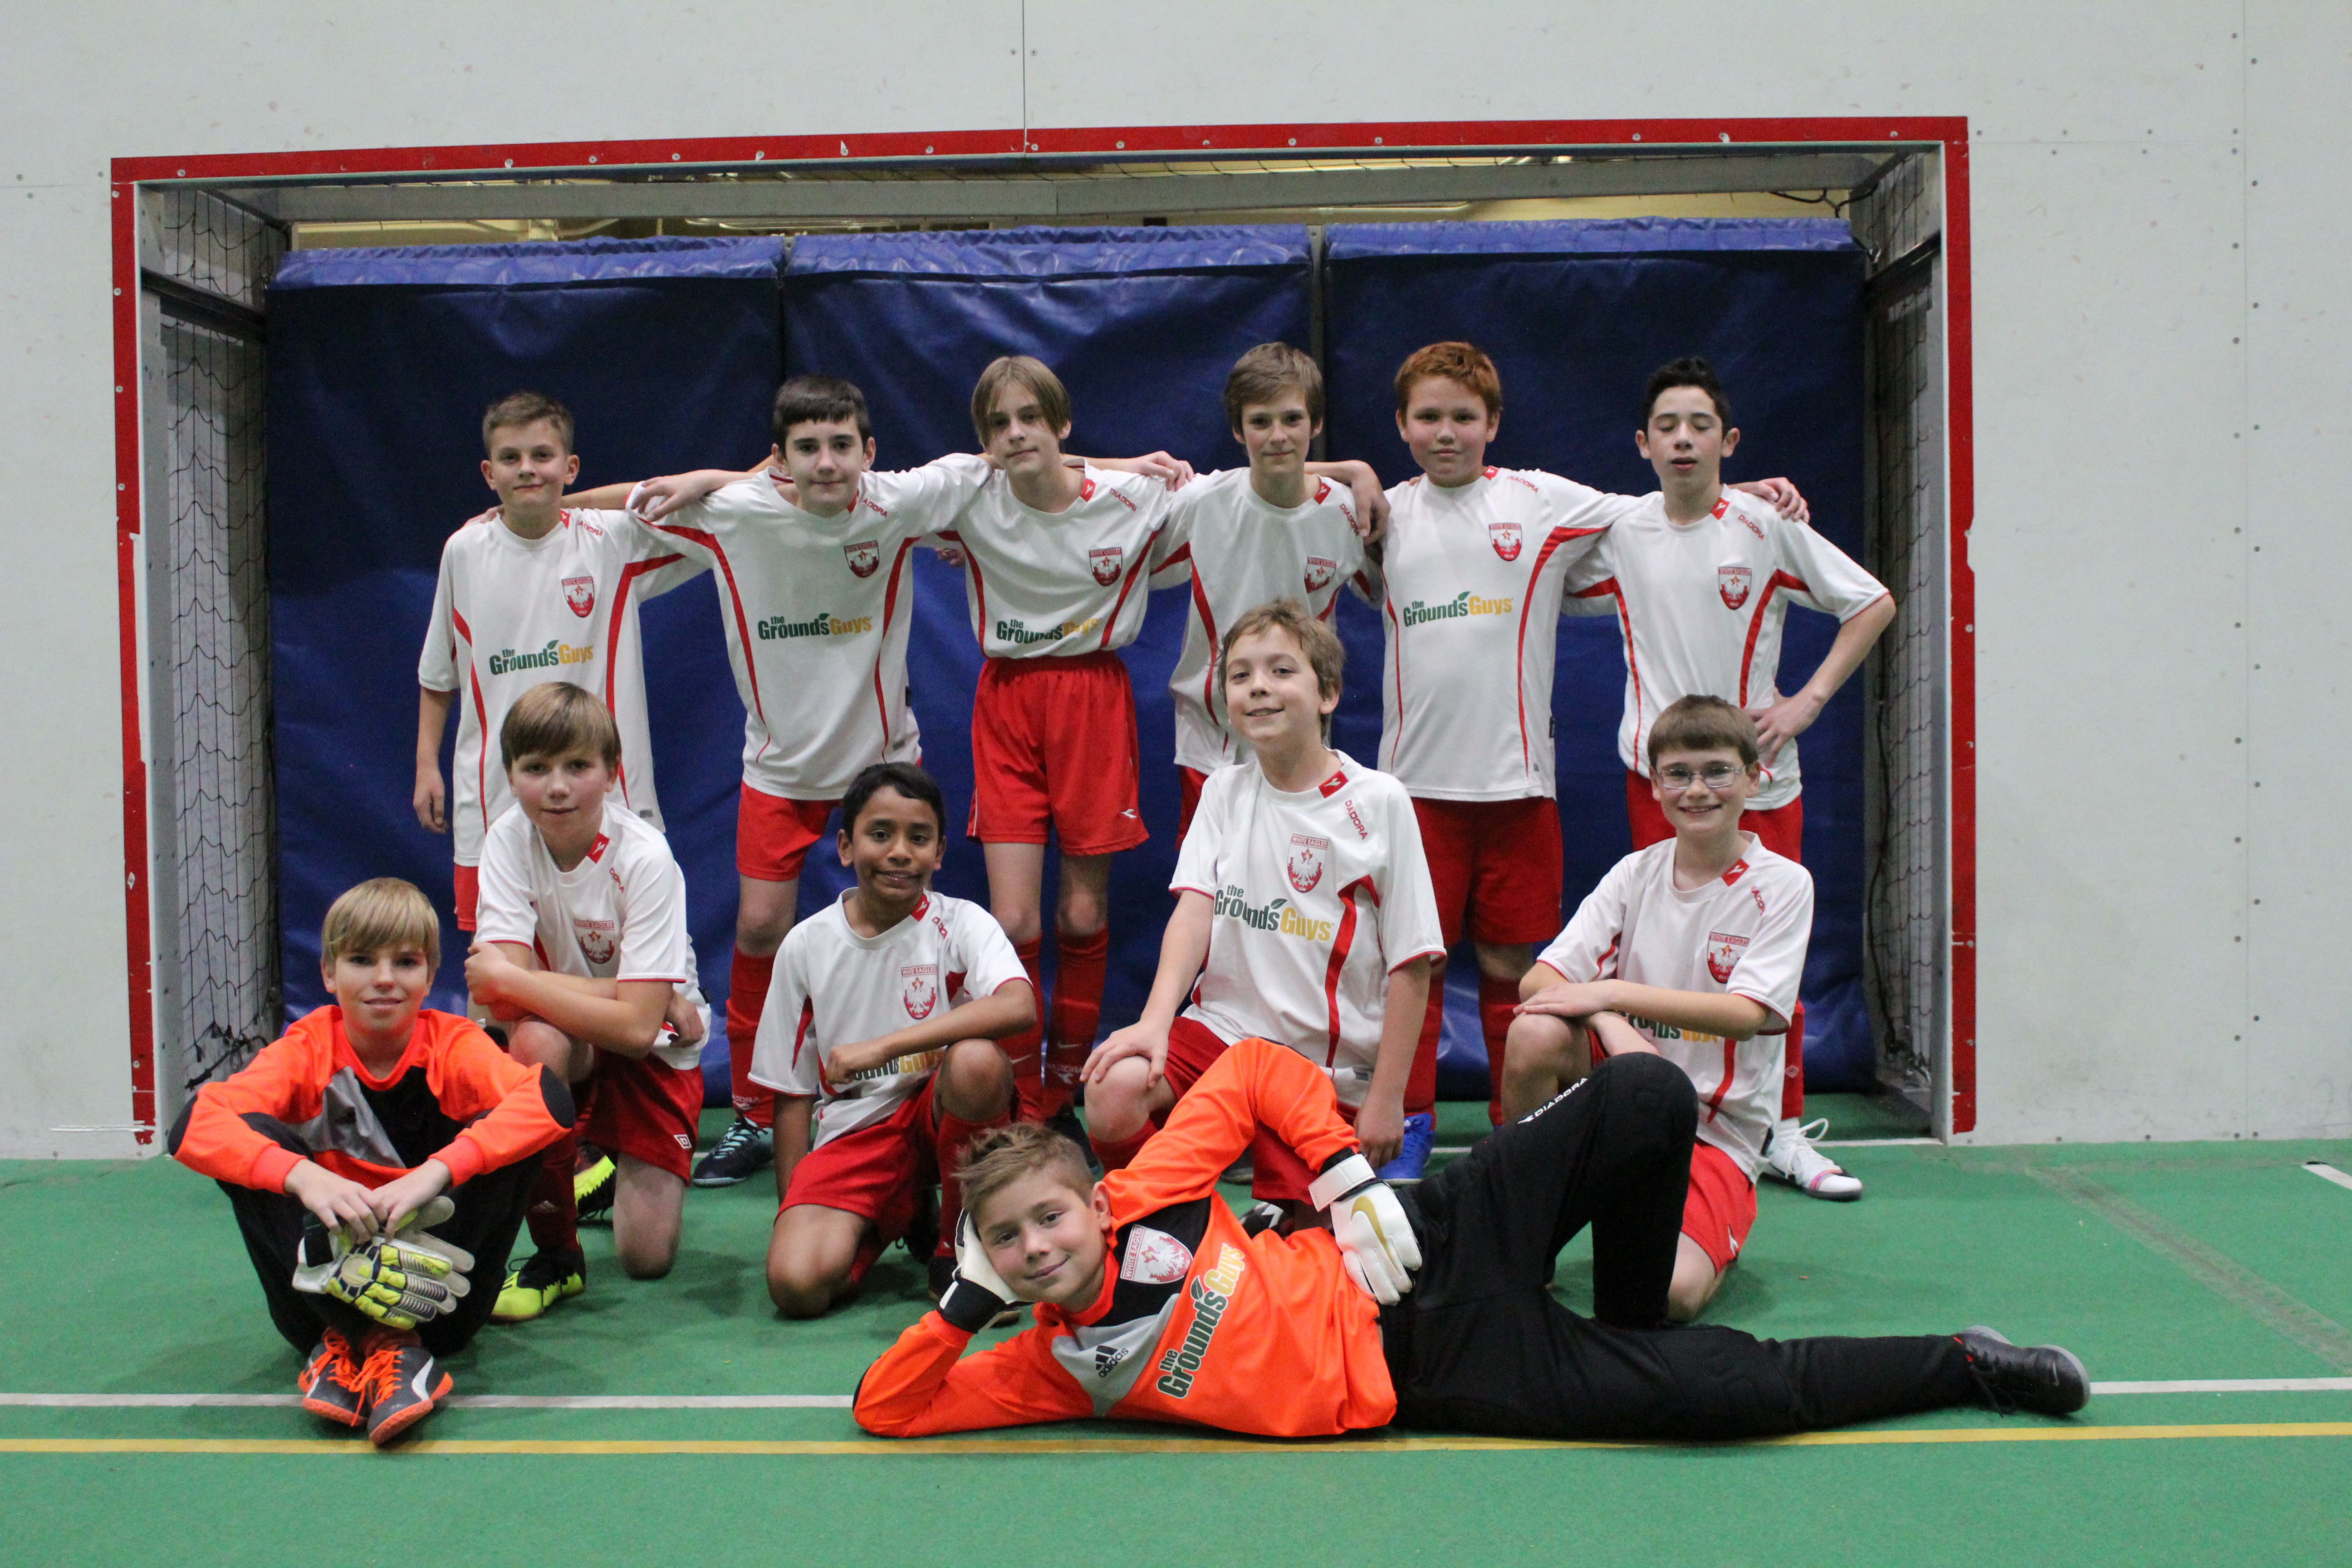 Great start to the indoor season by U13 team!